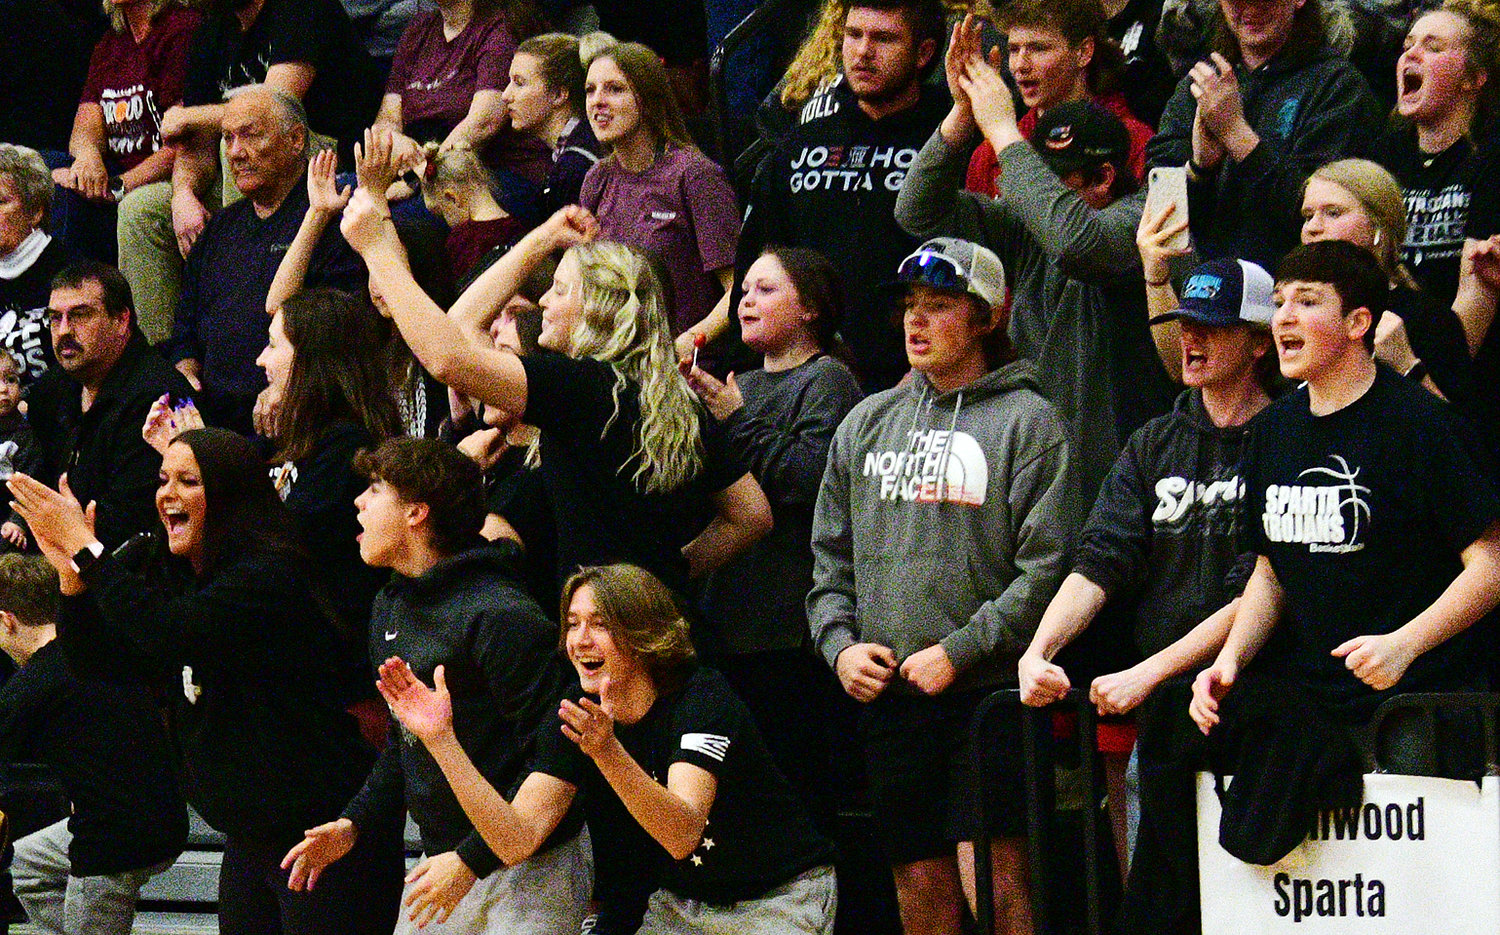 SPARTA FANS cheer on the Lady Trojans.